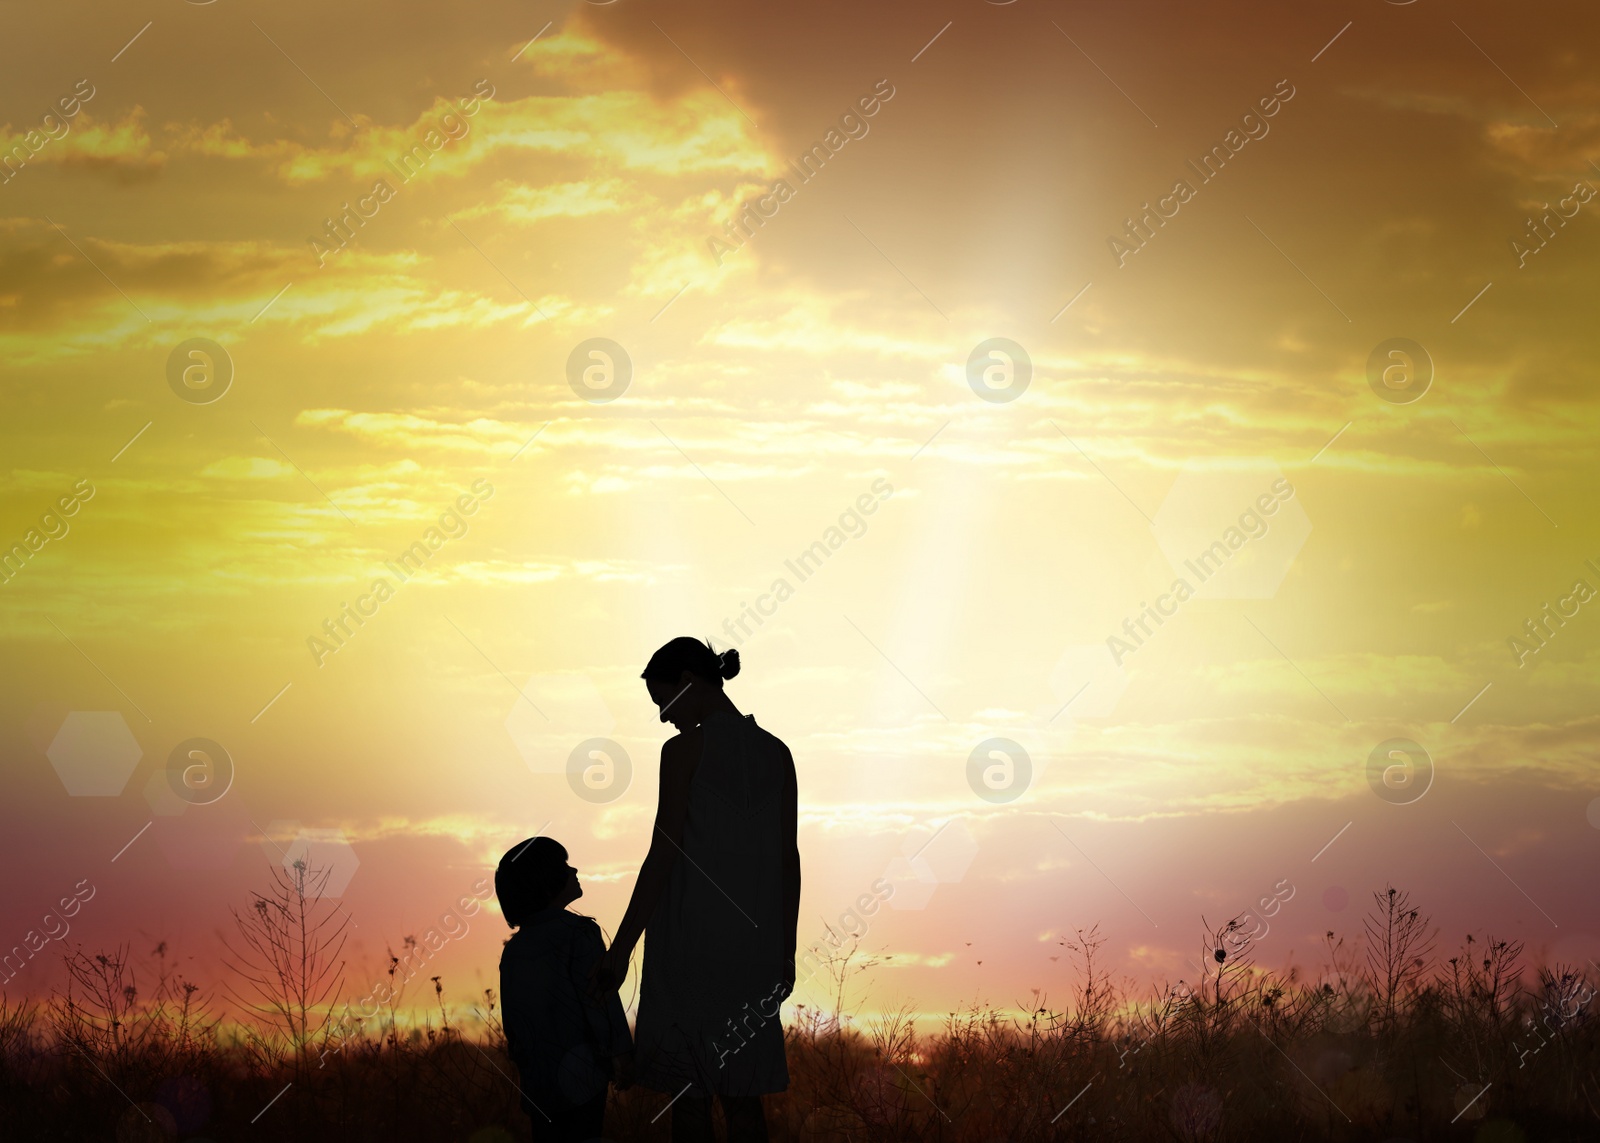 Image of Silhouettes of godparent with child in field at sunrise